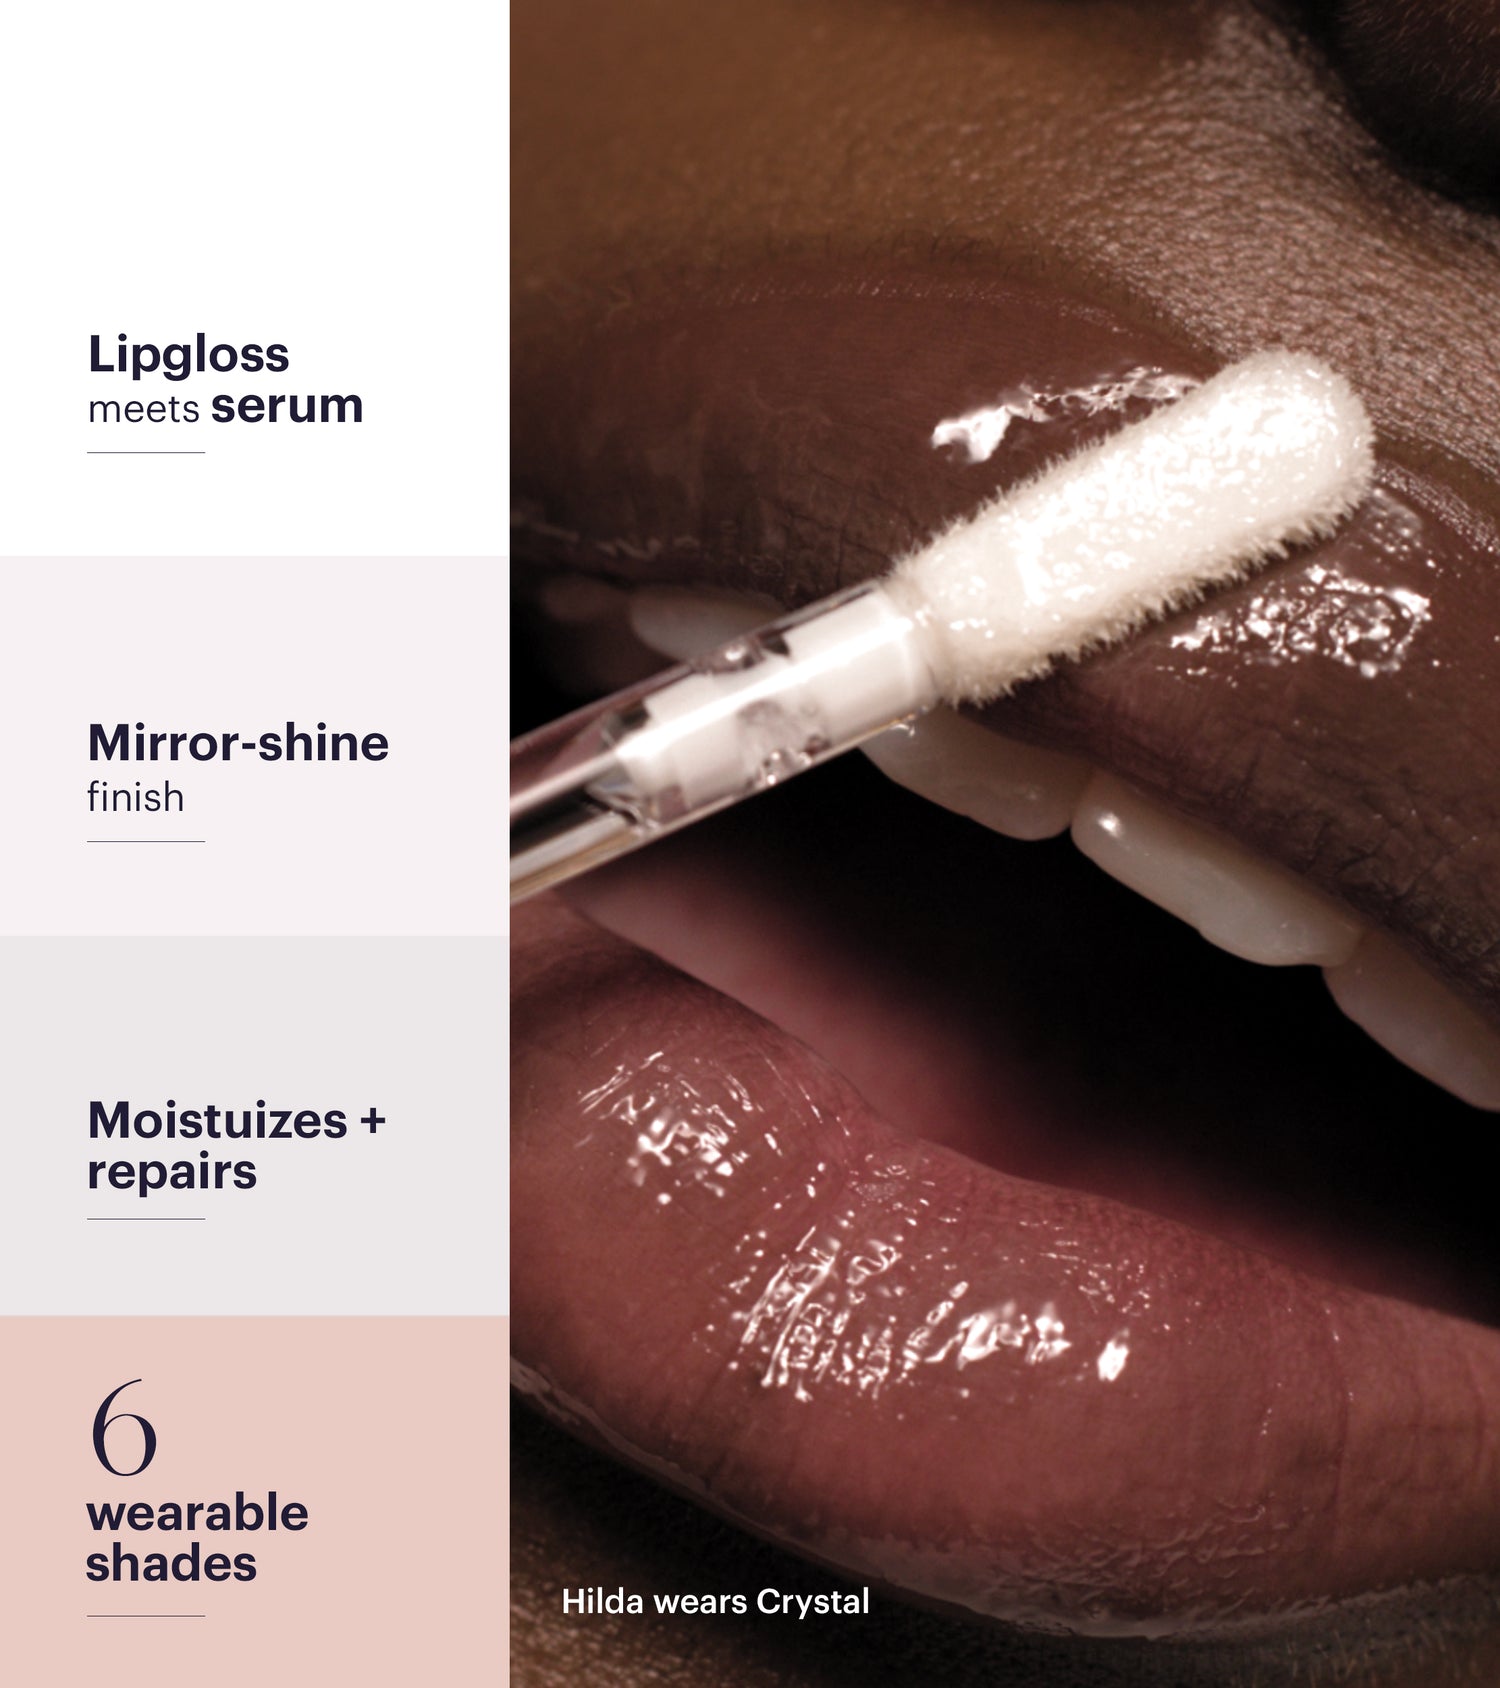 Pout Glaze High-Shine-Hyaluronic Lip Gloss (Crystal) Main Image featured